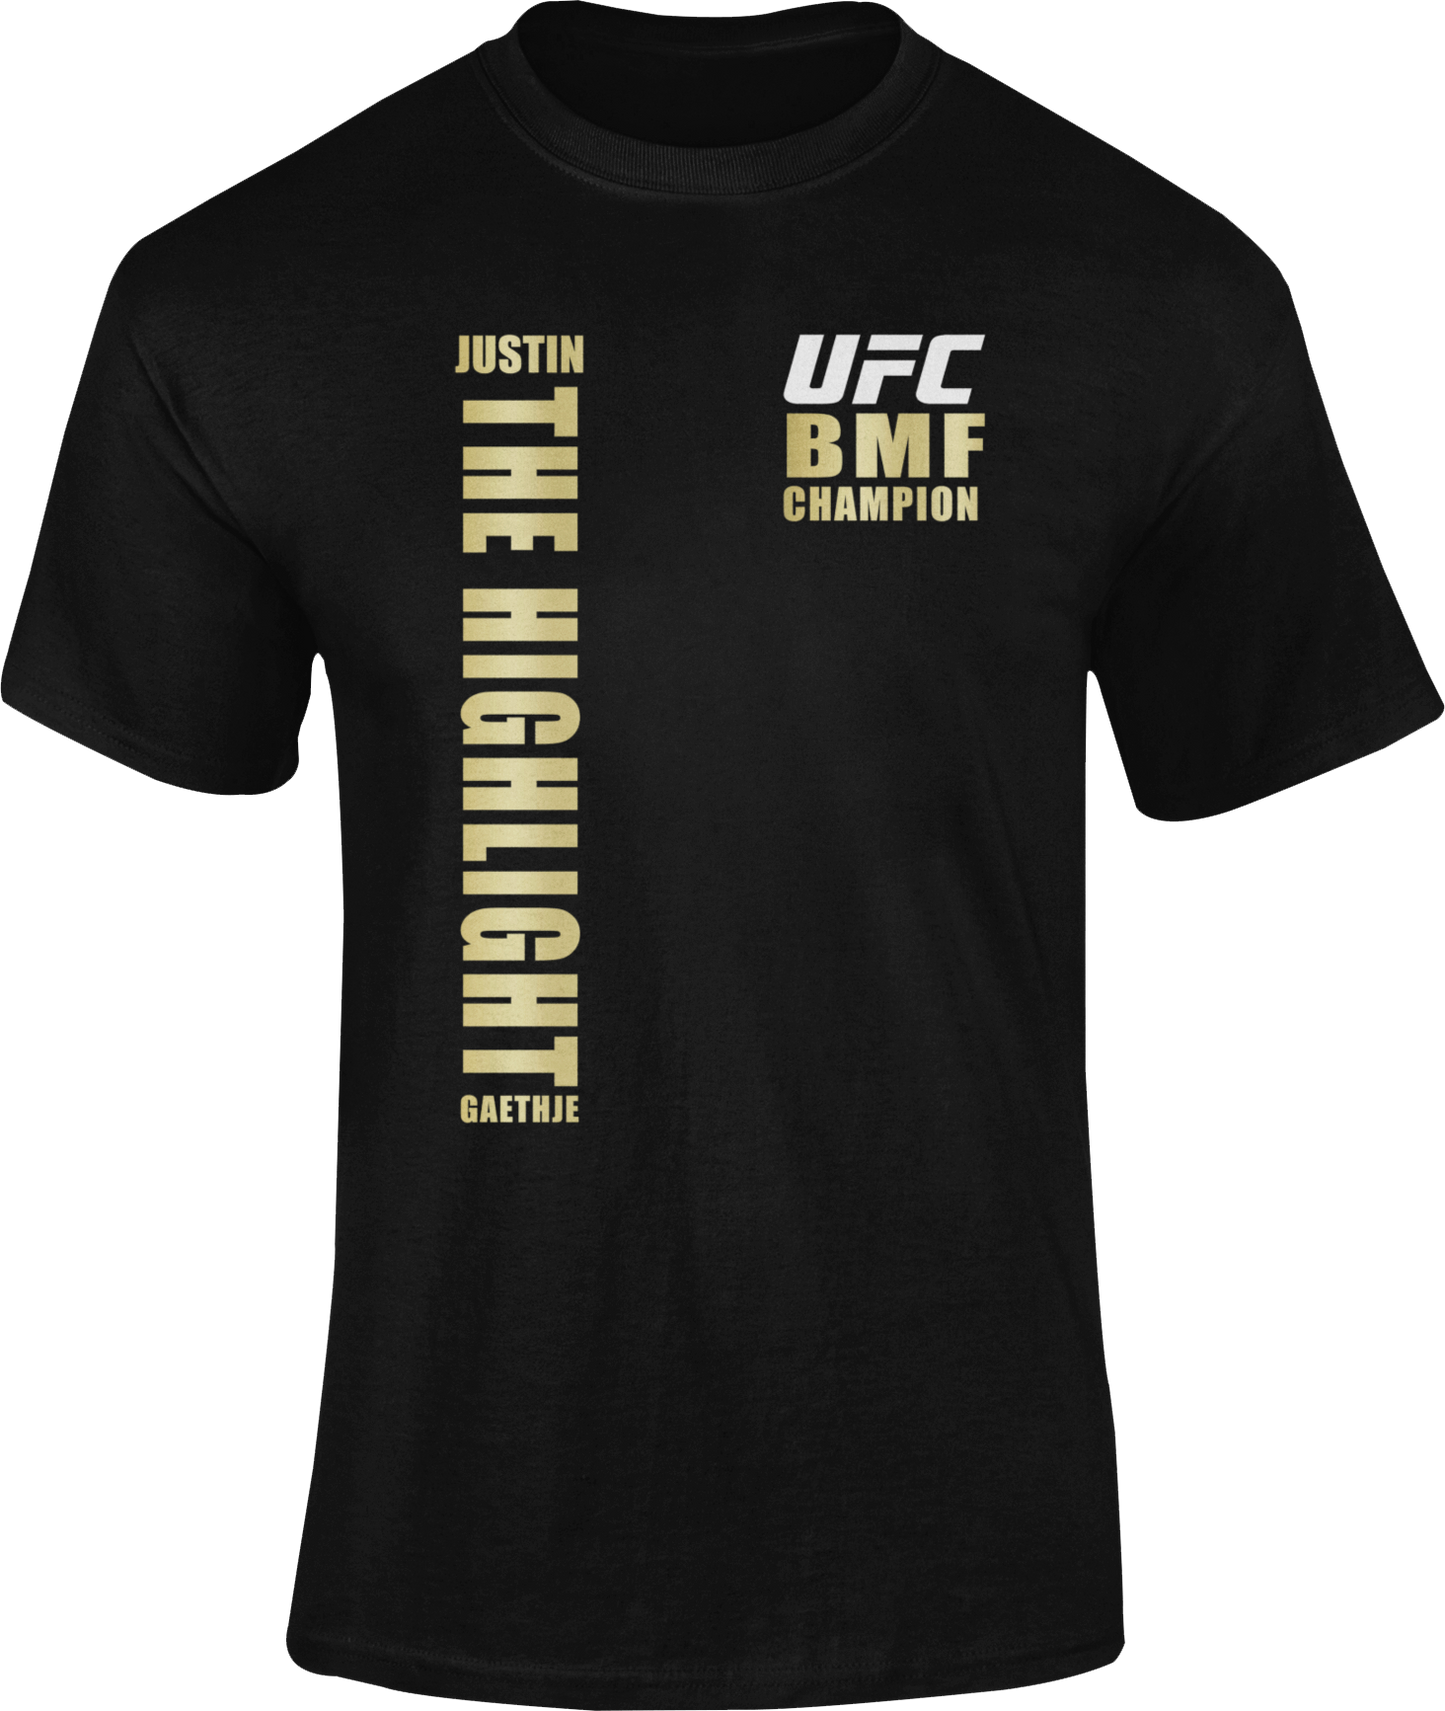 Justin "The Highlight" Gaethje UFC BMF Champ fan t shirt